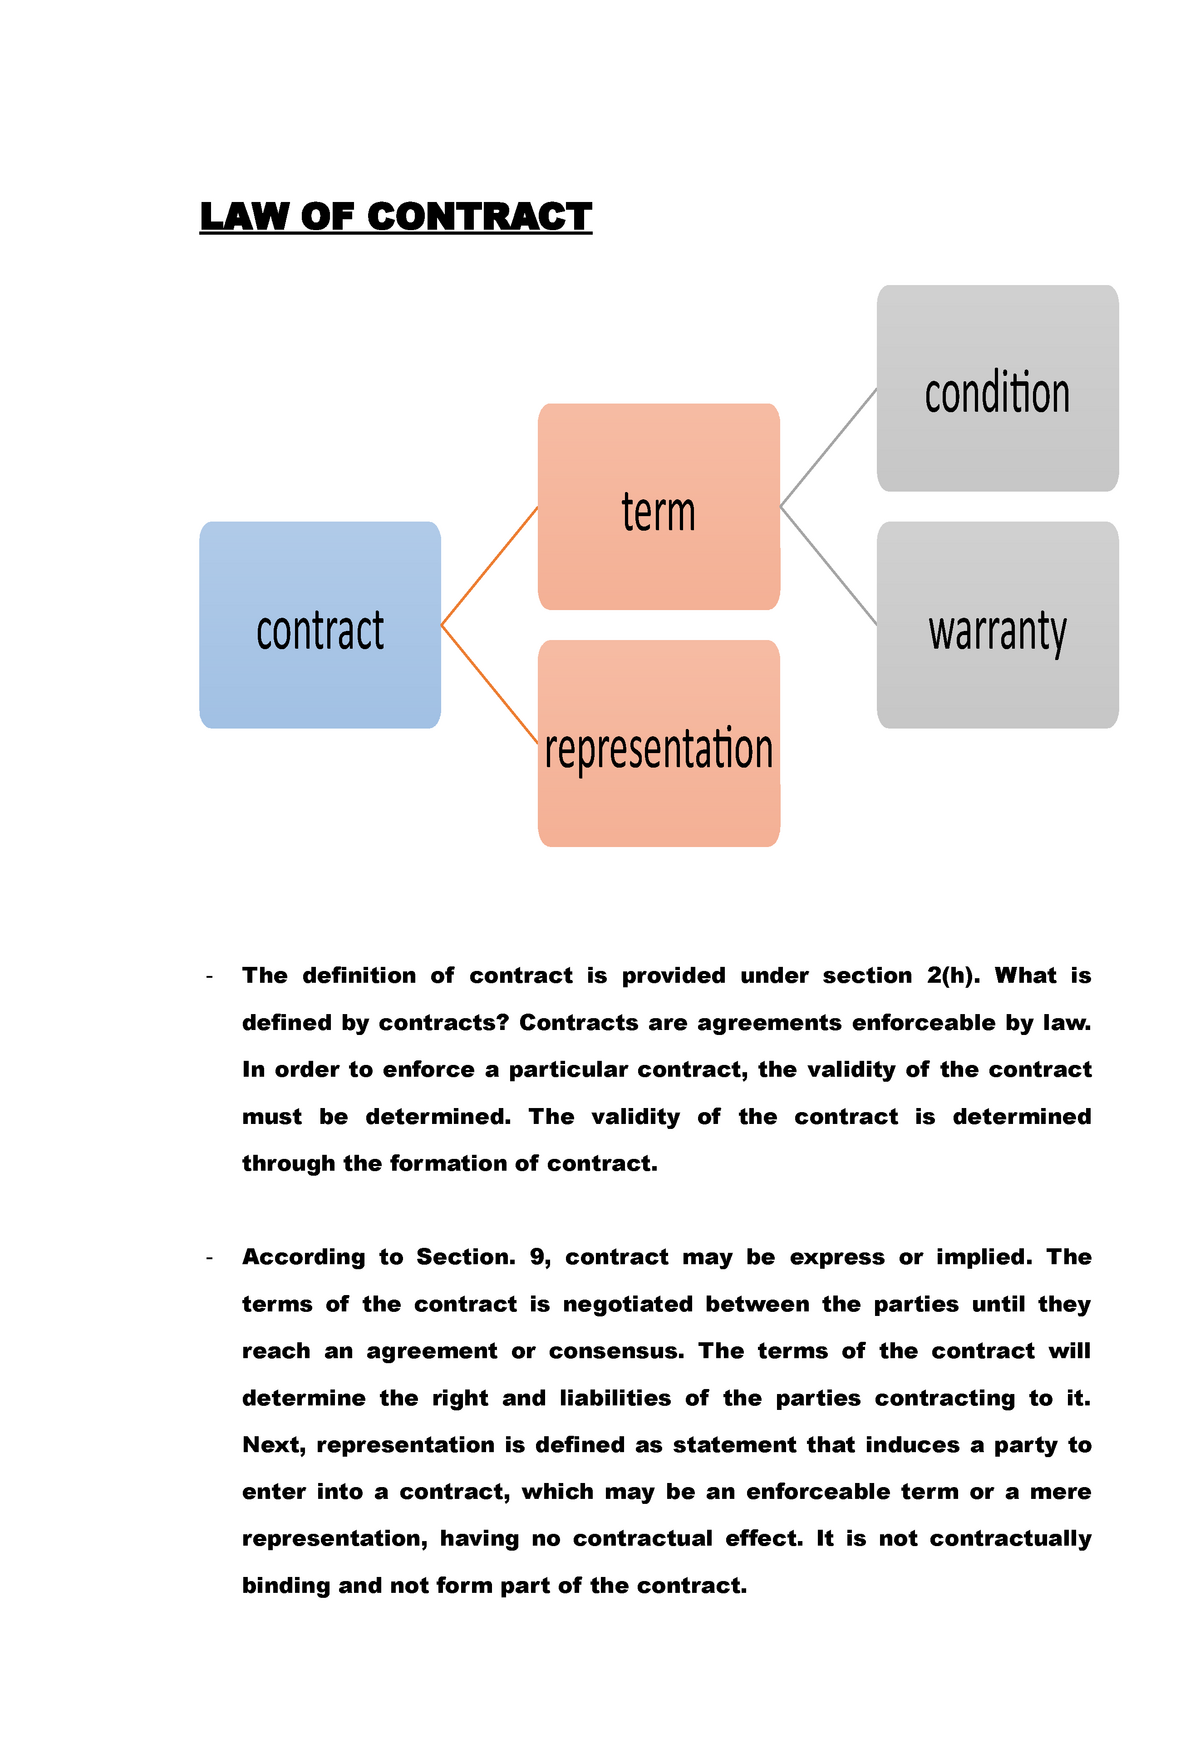 elements of contract law essay